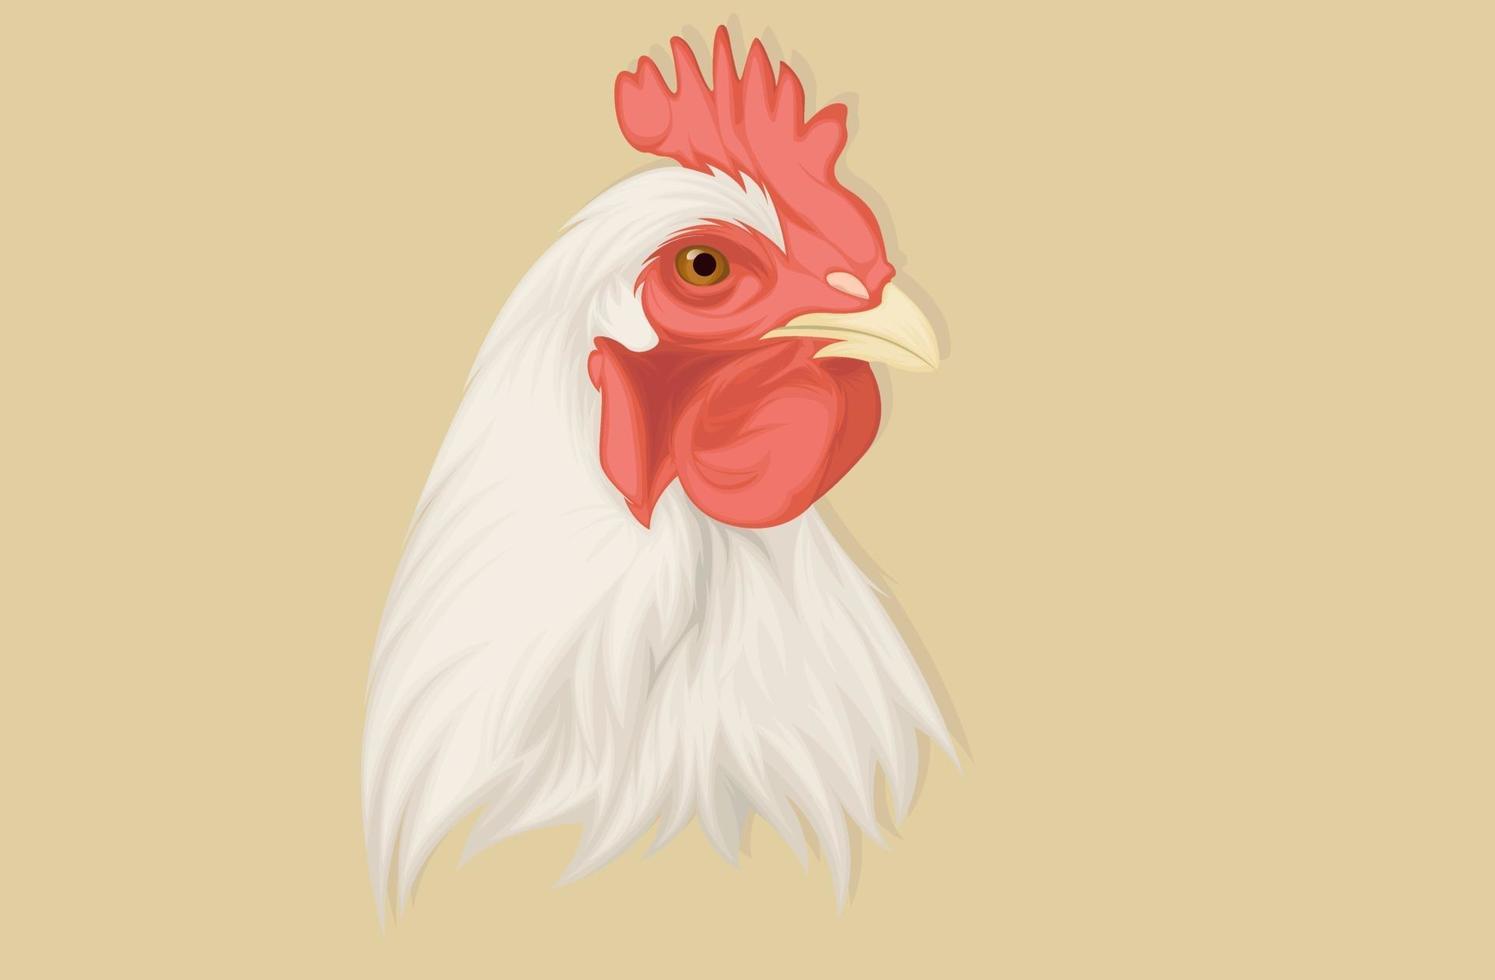 Realistic chicken illustration hand drawing vector